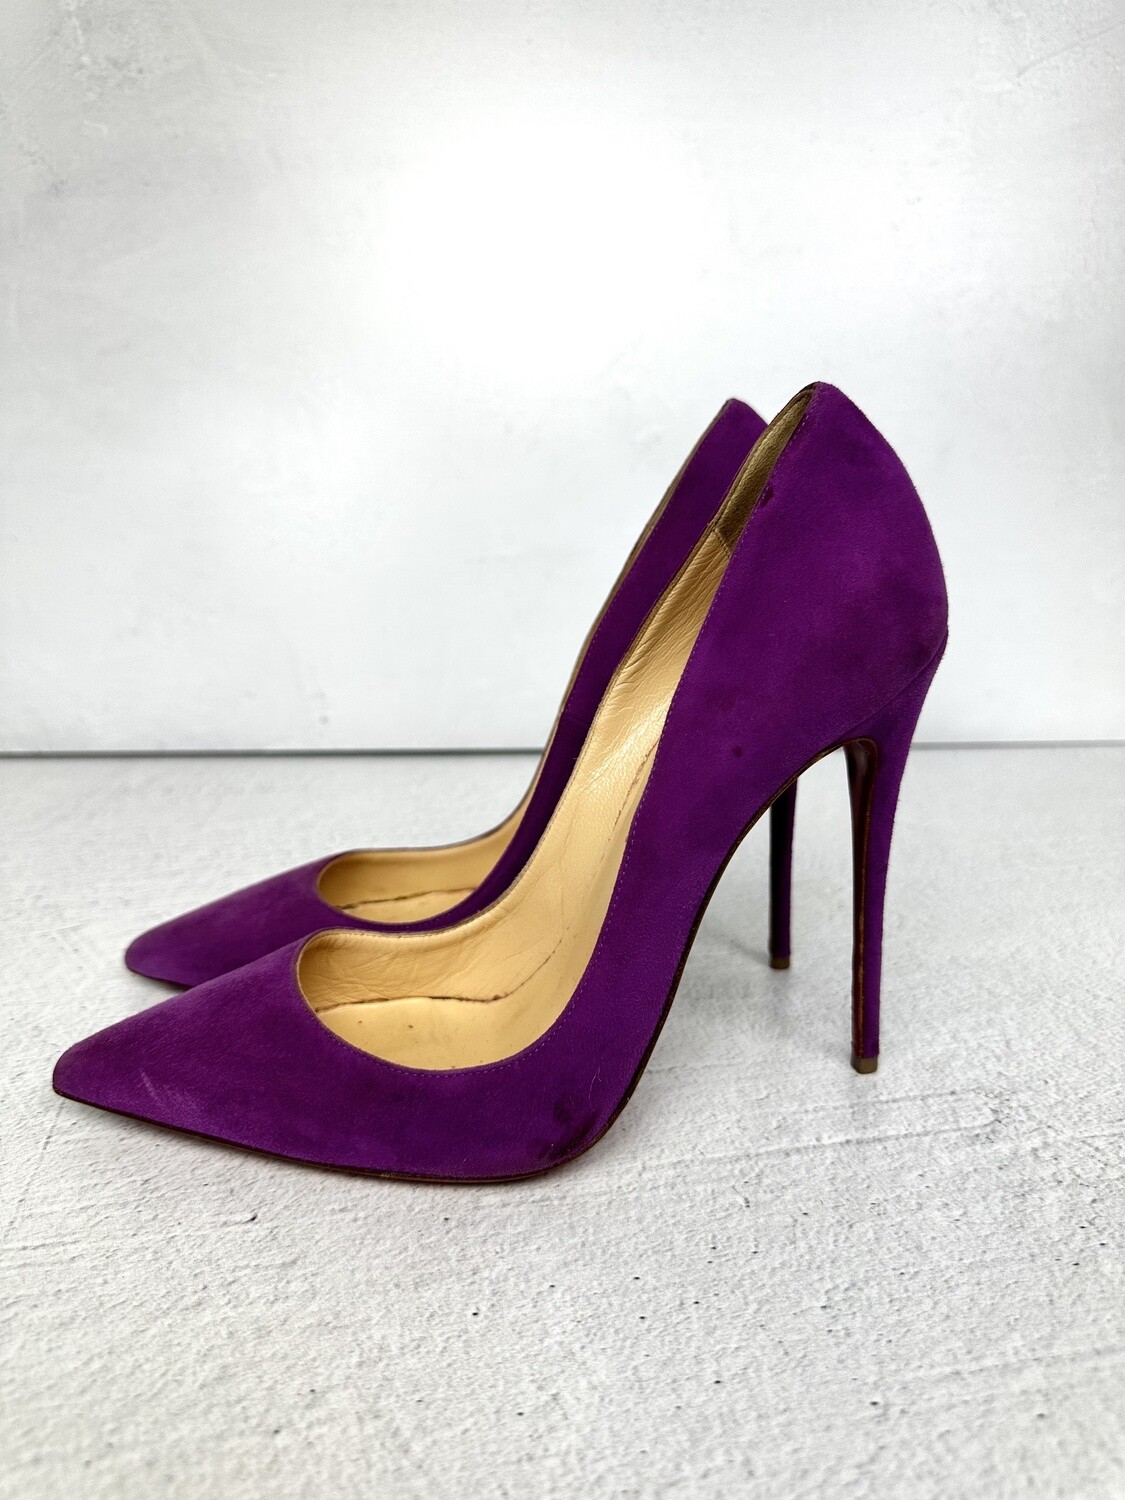 Christian Louboutin Pumps, Purple Suede Heels, Size 39.5, Preowned in Dustbag, CMA01